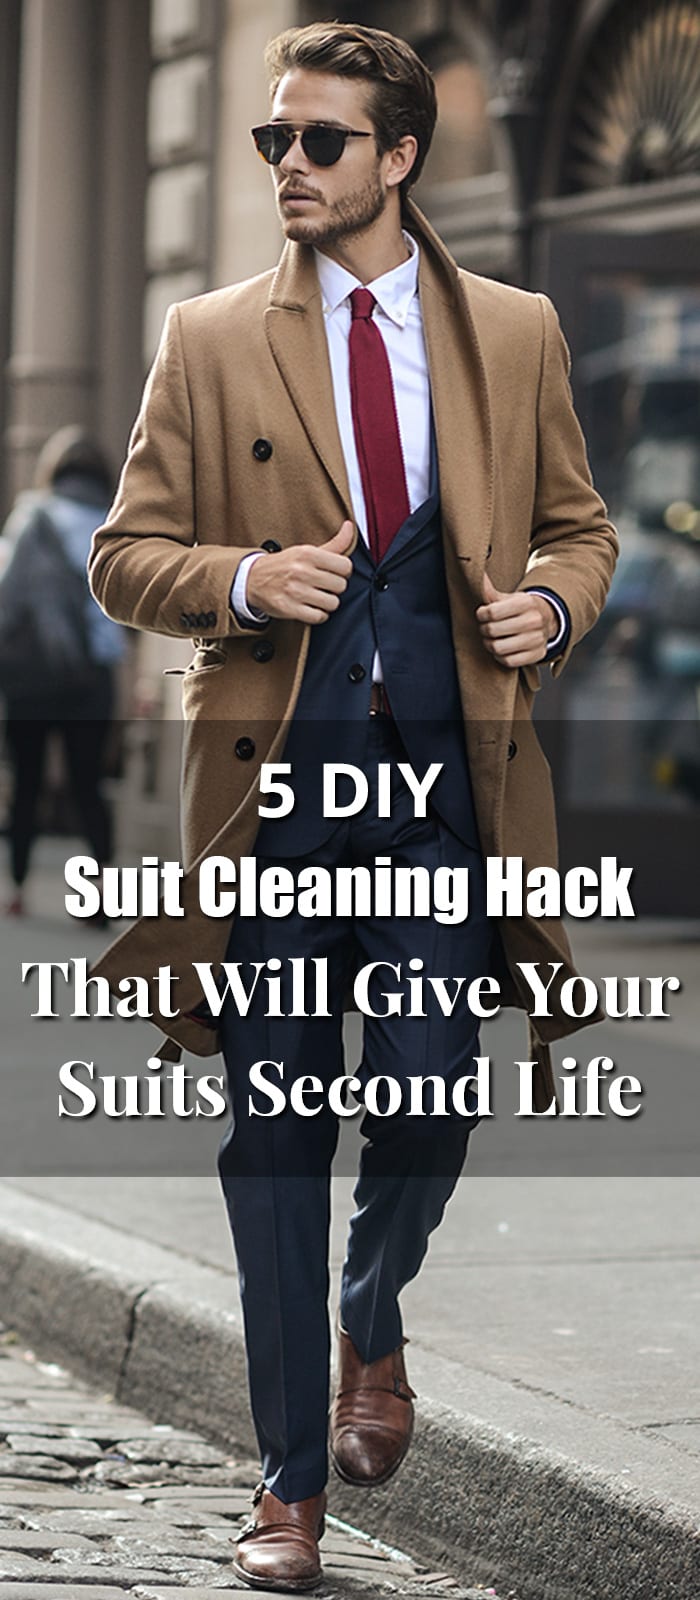 5 DIY Suit Cleaning Hack That Will Give Your Suits Second Life